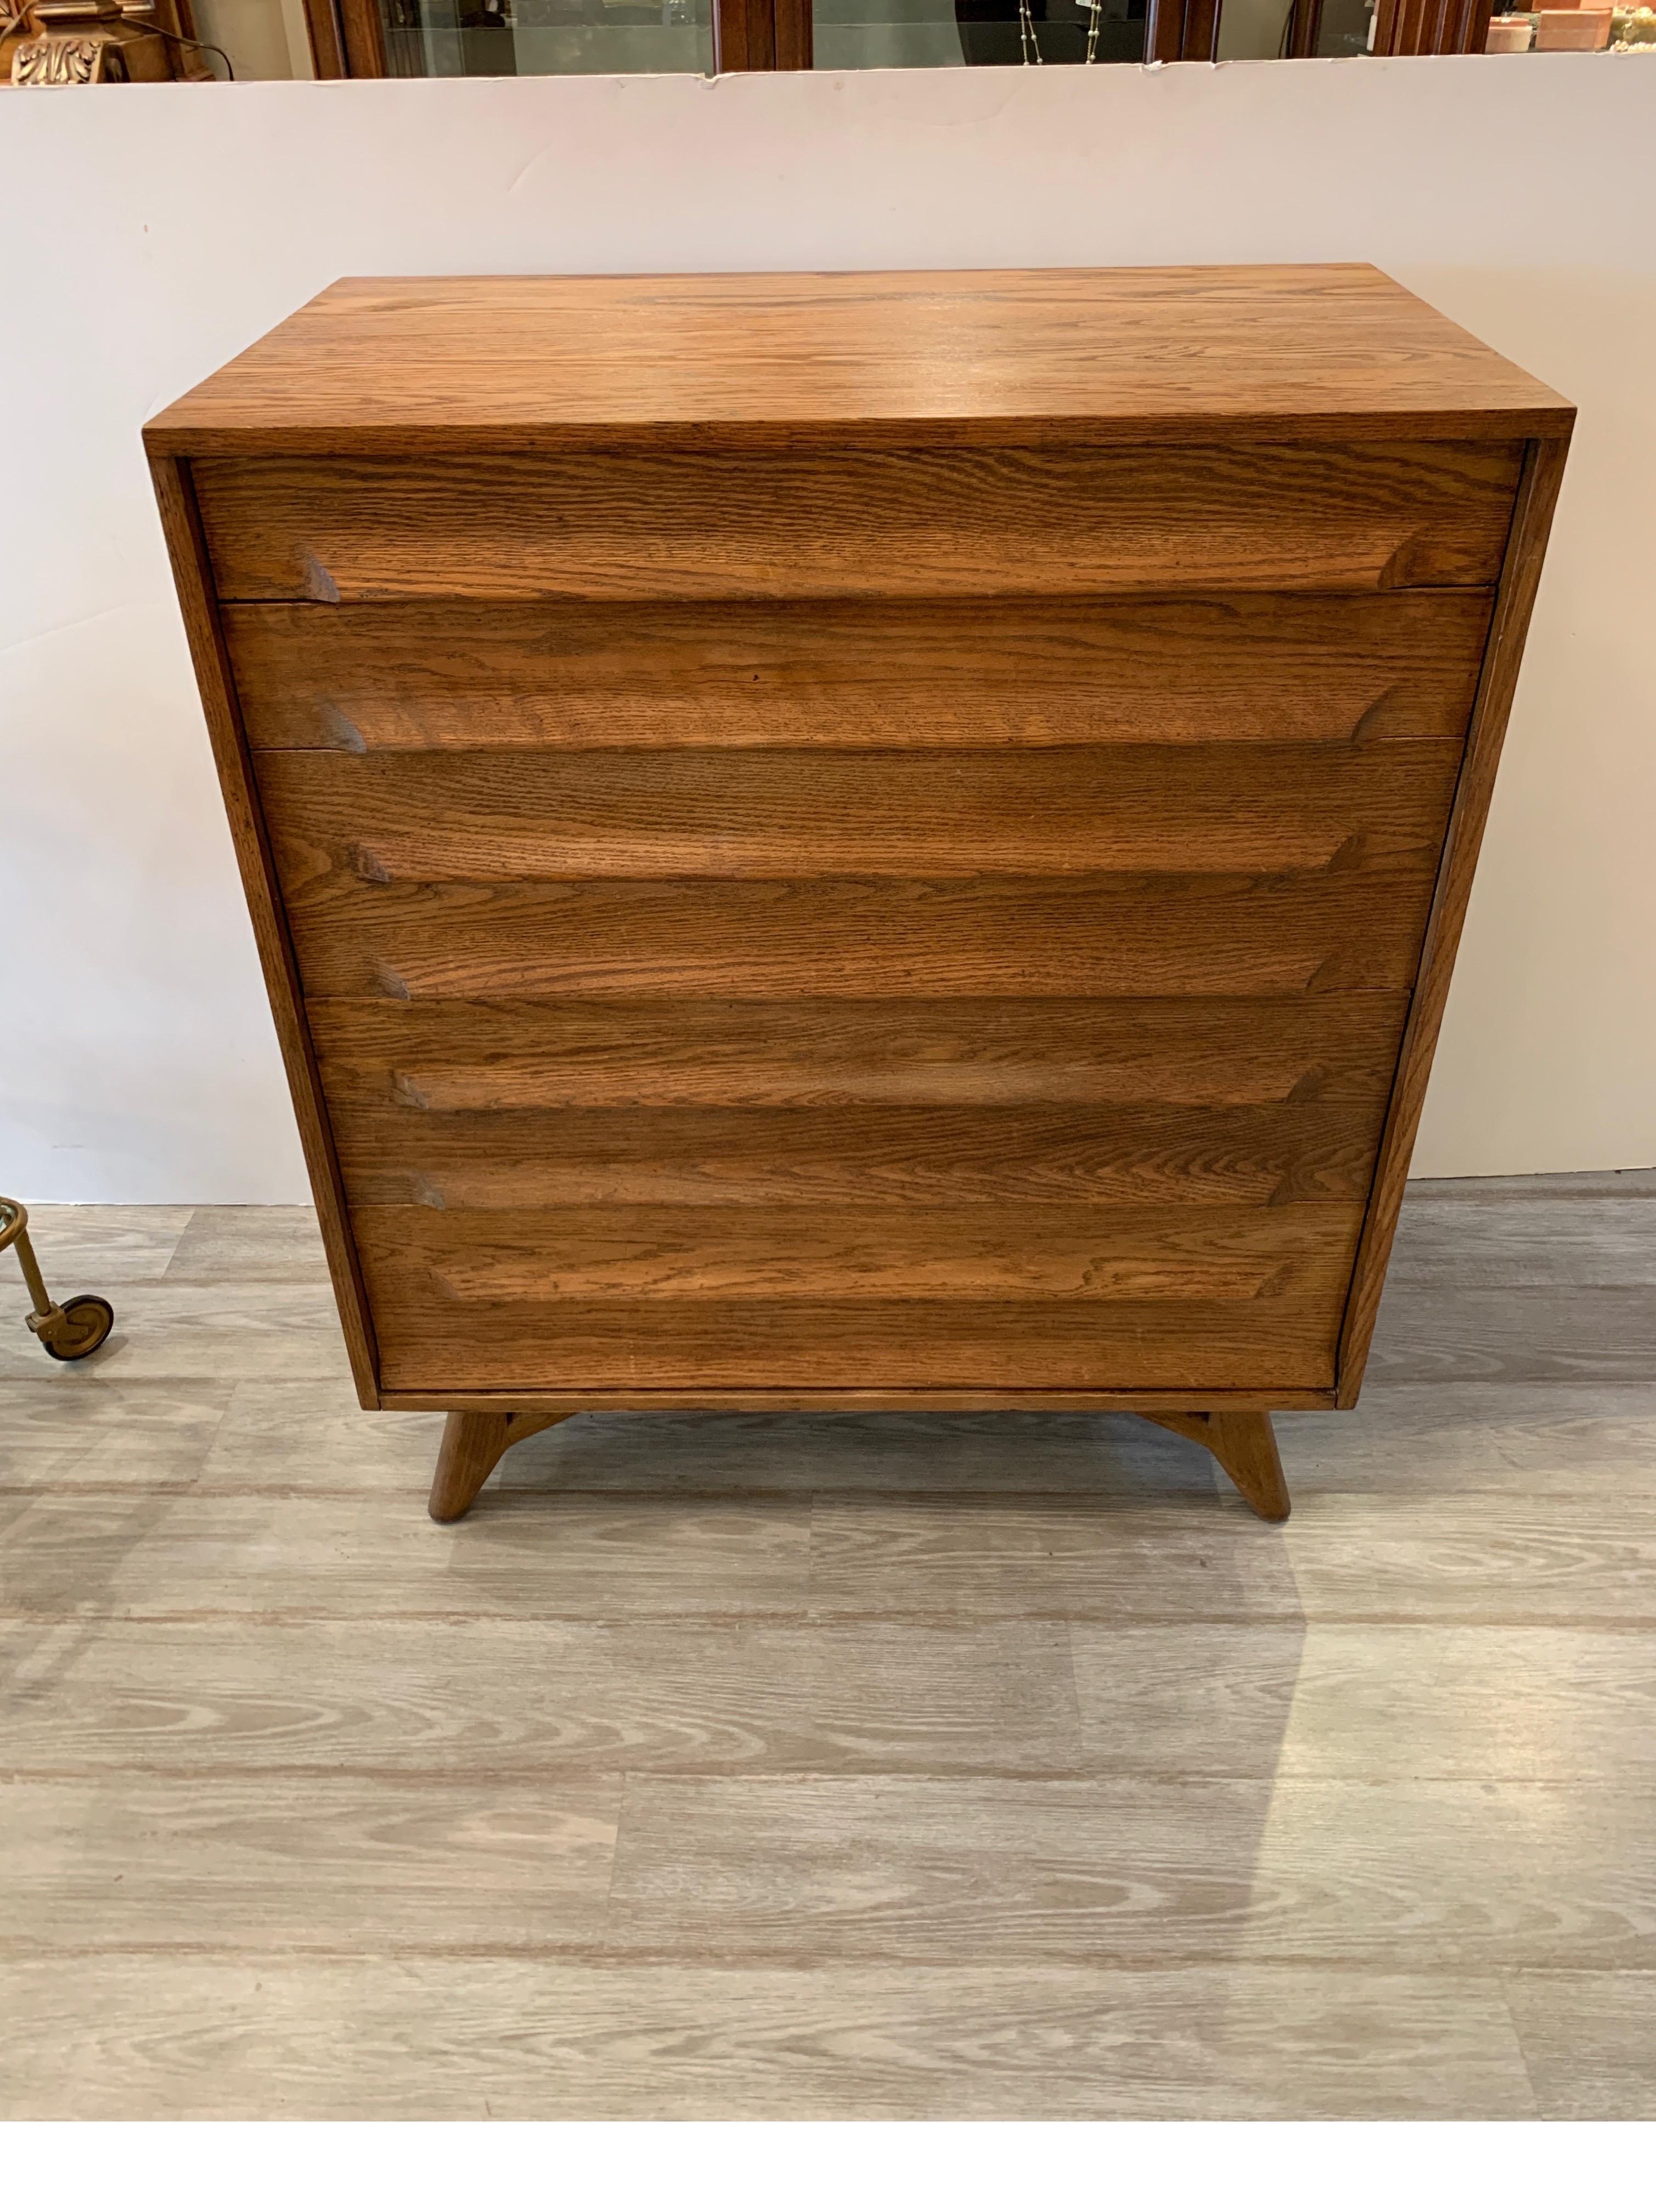 A 1950s Jack Van der Molen 5-drawer dresser made by Jamestown Lounge Company from the American Casual line. The drawers with integrated handles
  